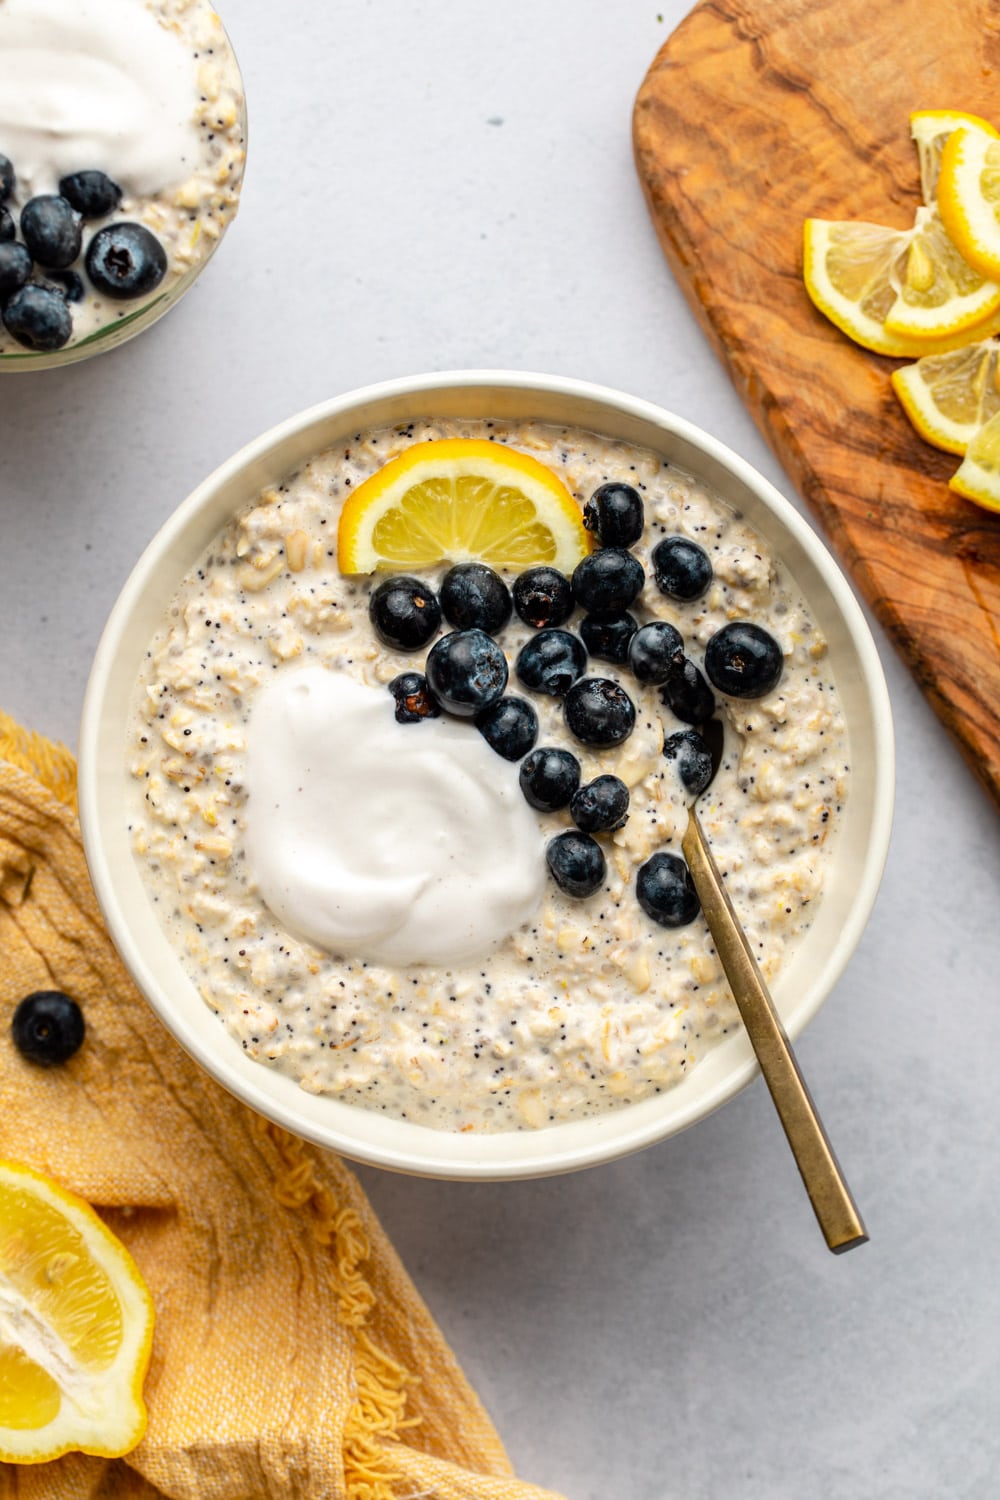 lemon poppyseed overnight oats served in a white bowl topped with berries and yoghurt